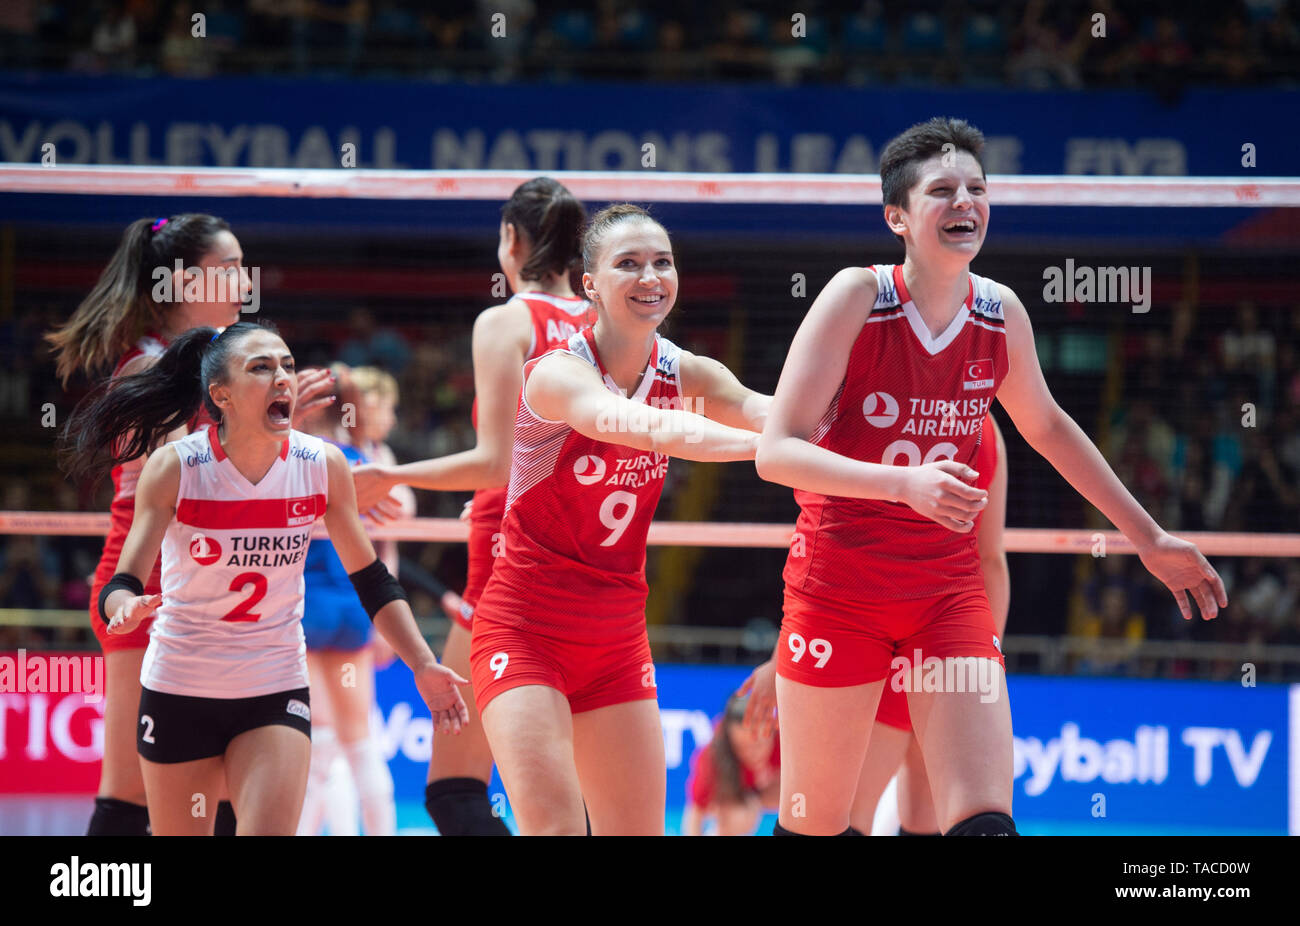 Belgrade, Serbia. 23rd May, 2019. Players of Turkey celebrate during the 2019 FIVB Volleyball Nations League womens game between Turkey and Serbia in Belgrade, Serbia, May 23, 2019